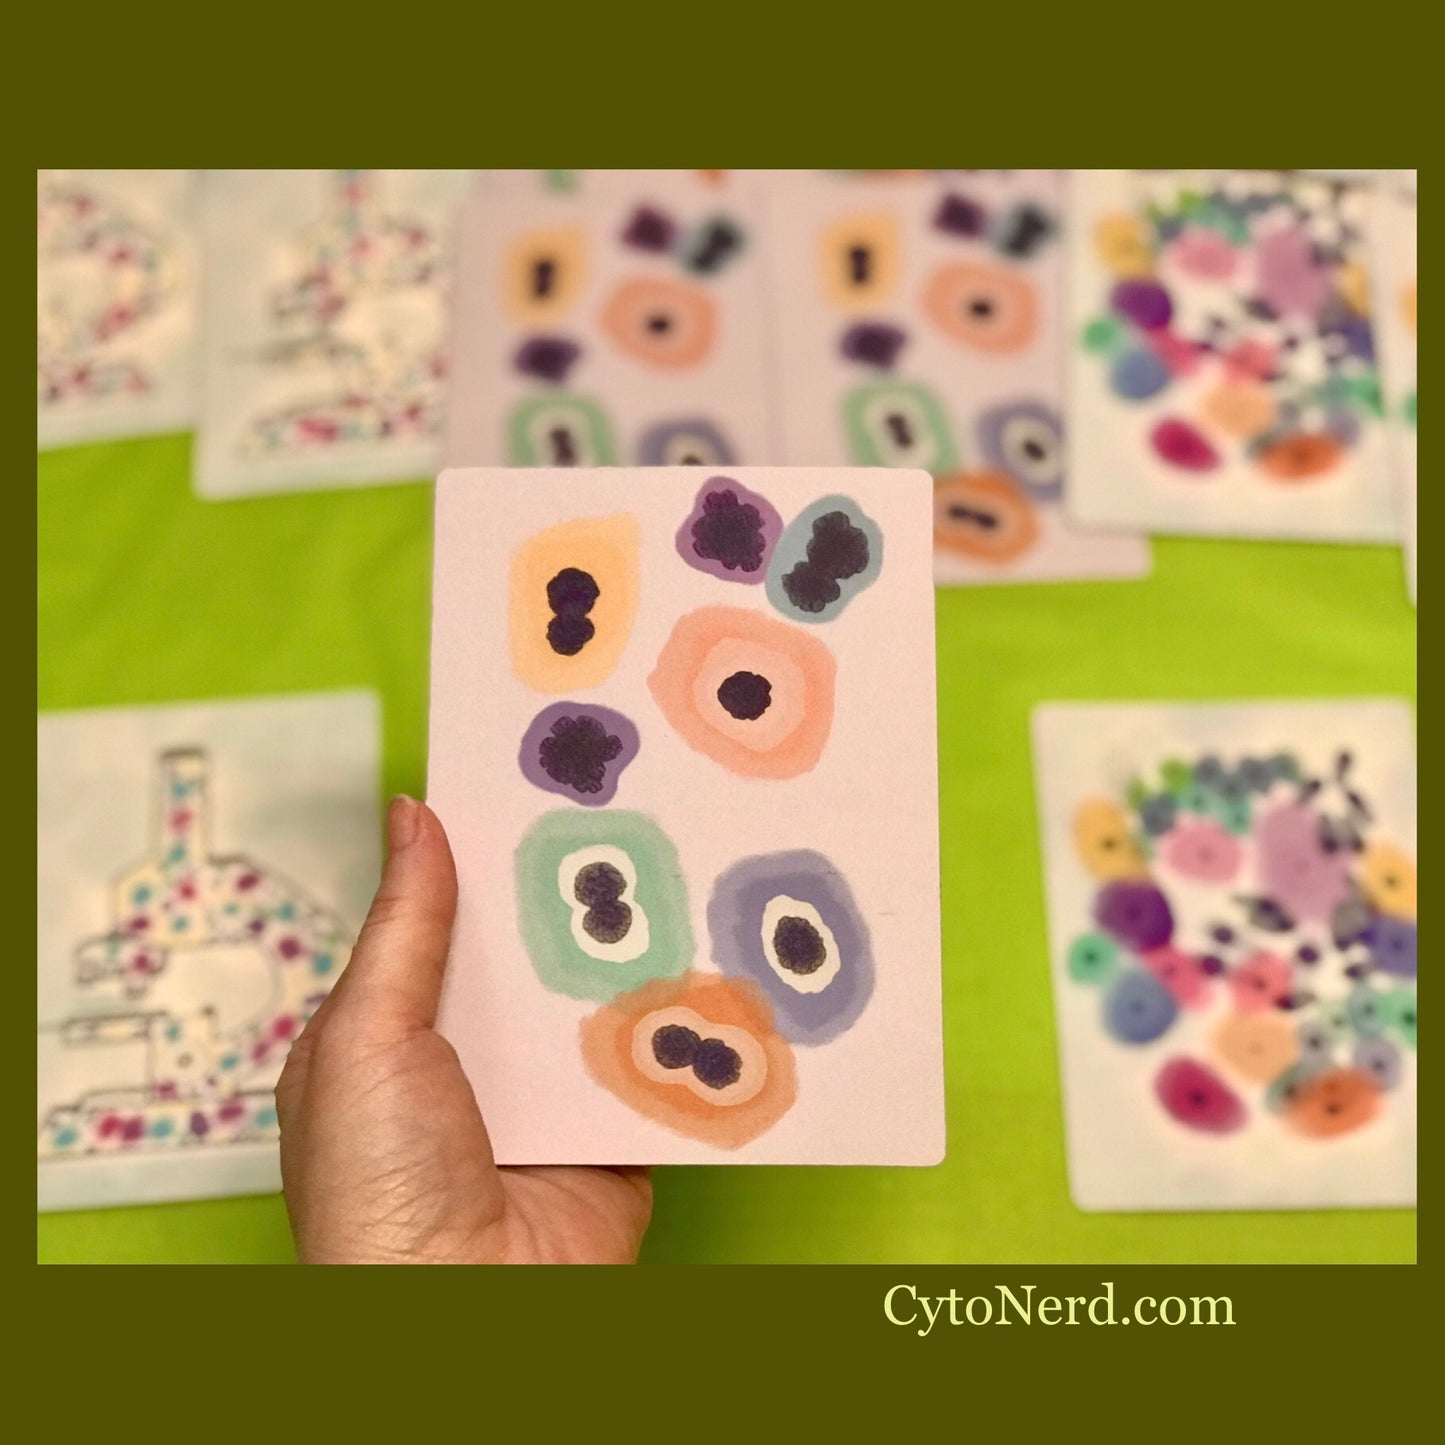 Fridge Magnets - of cells with dysplasia from the cervix